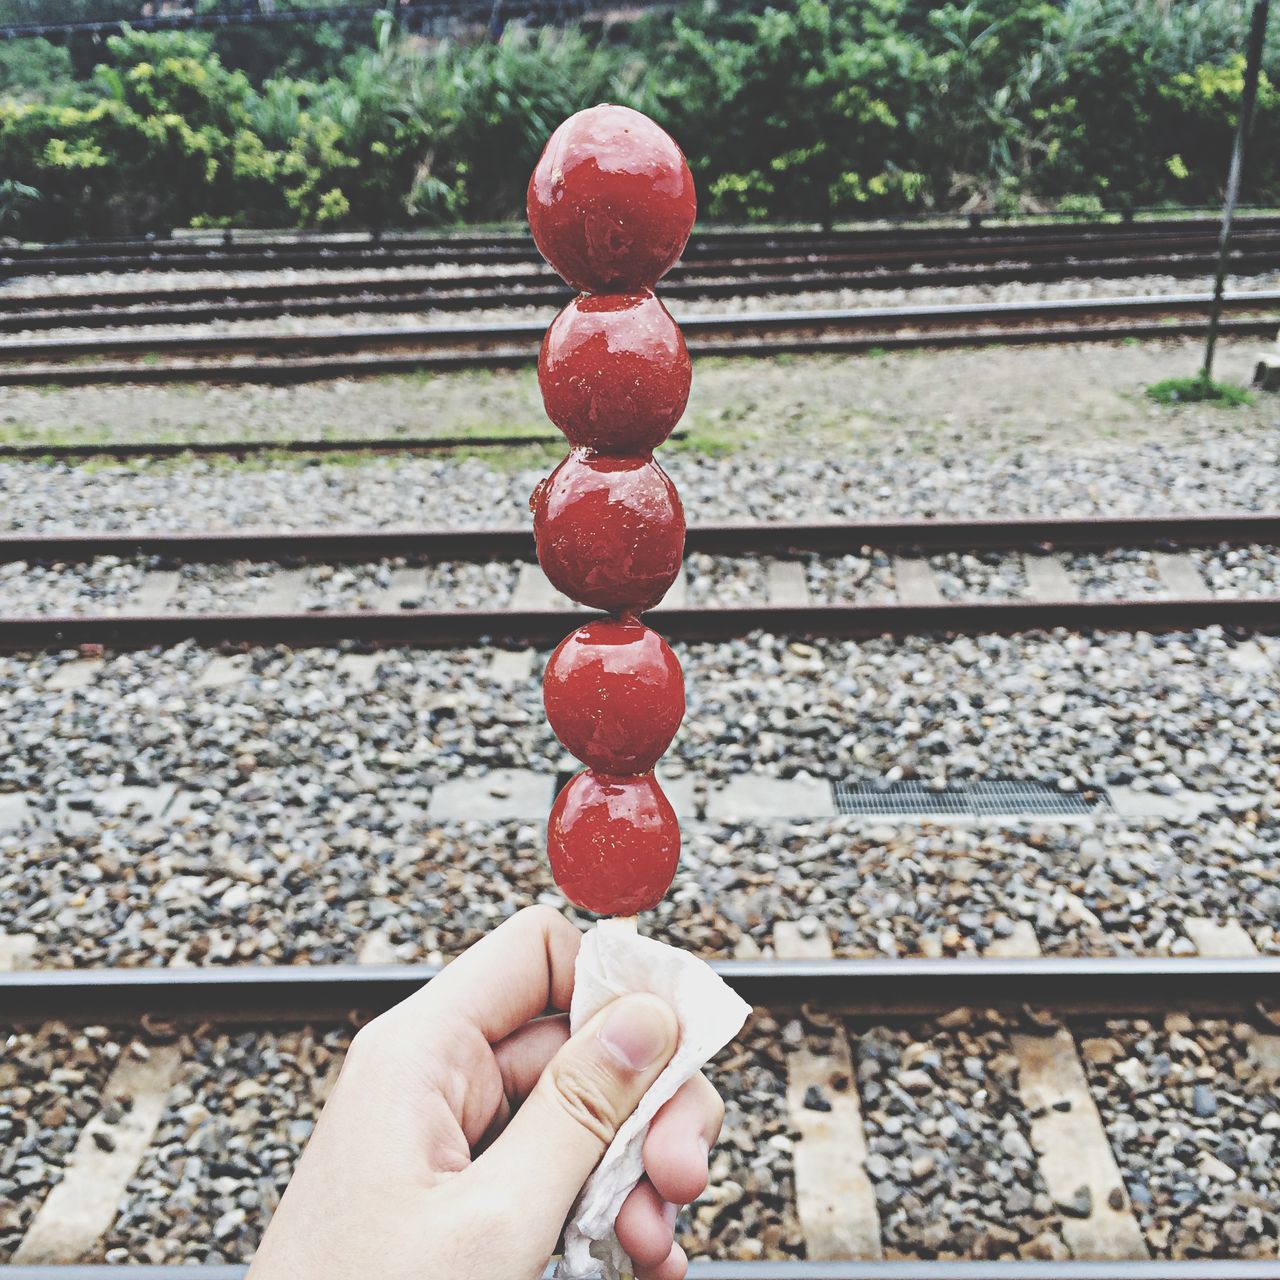 person, holding, part of, personal perspective, lifestyles, unrecognizable person, leisure activity, cropped, men, food and drink, human finger, food, red, day, railroad track, freshness